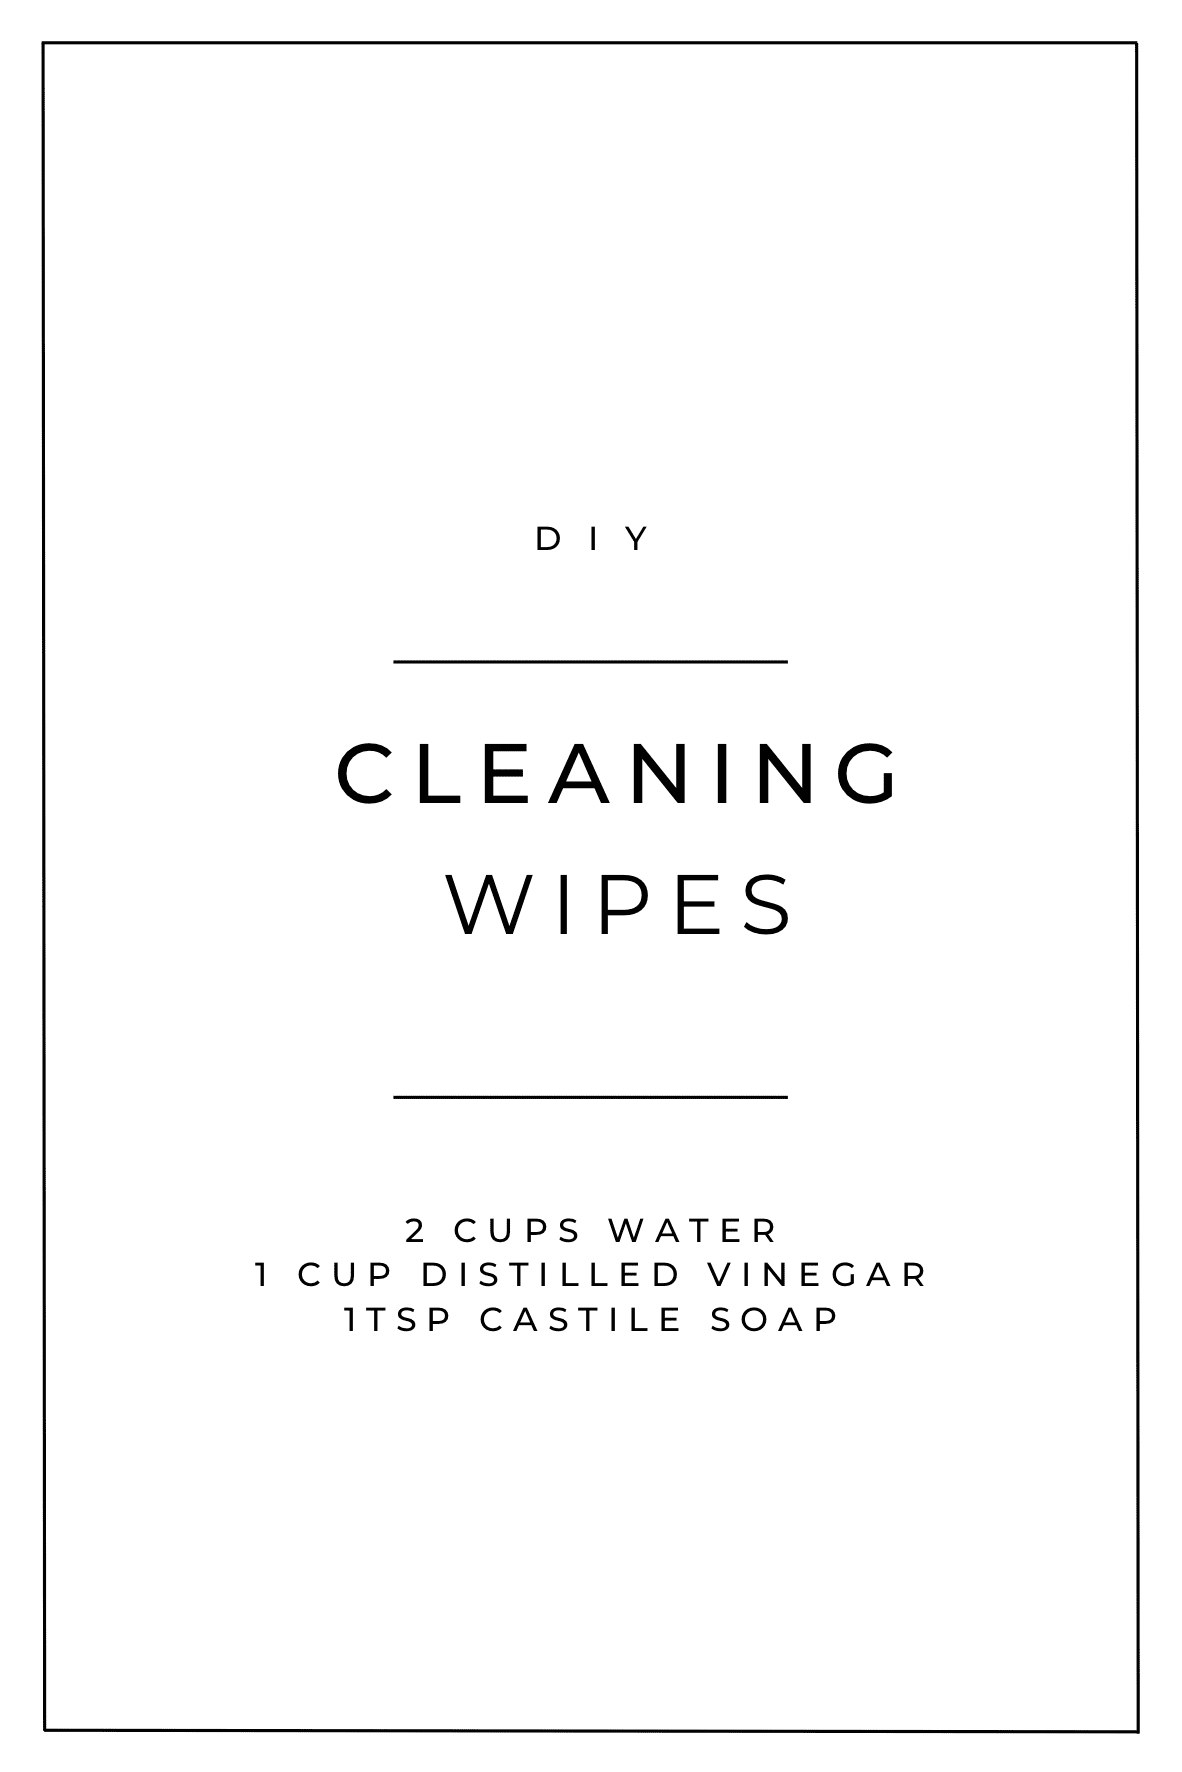 homemade cleaning solution recipes